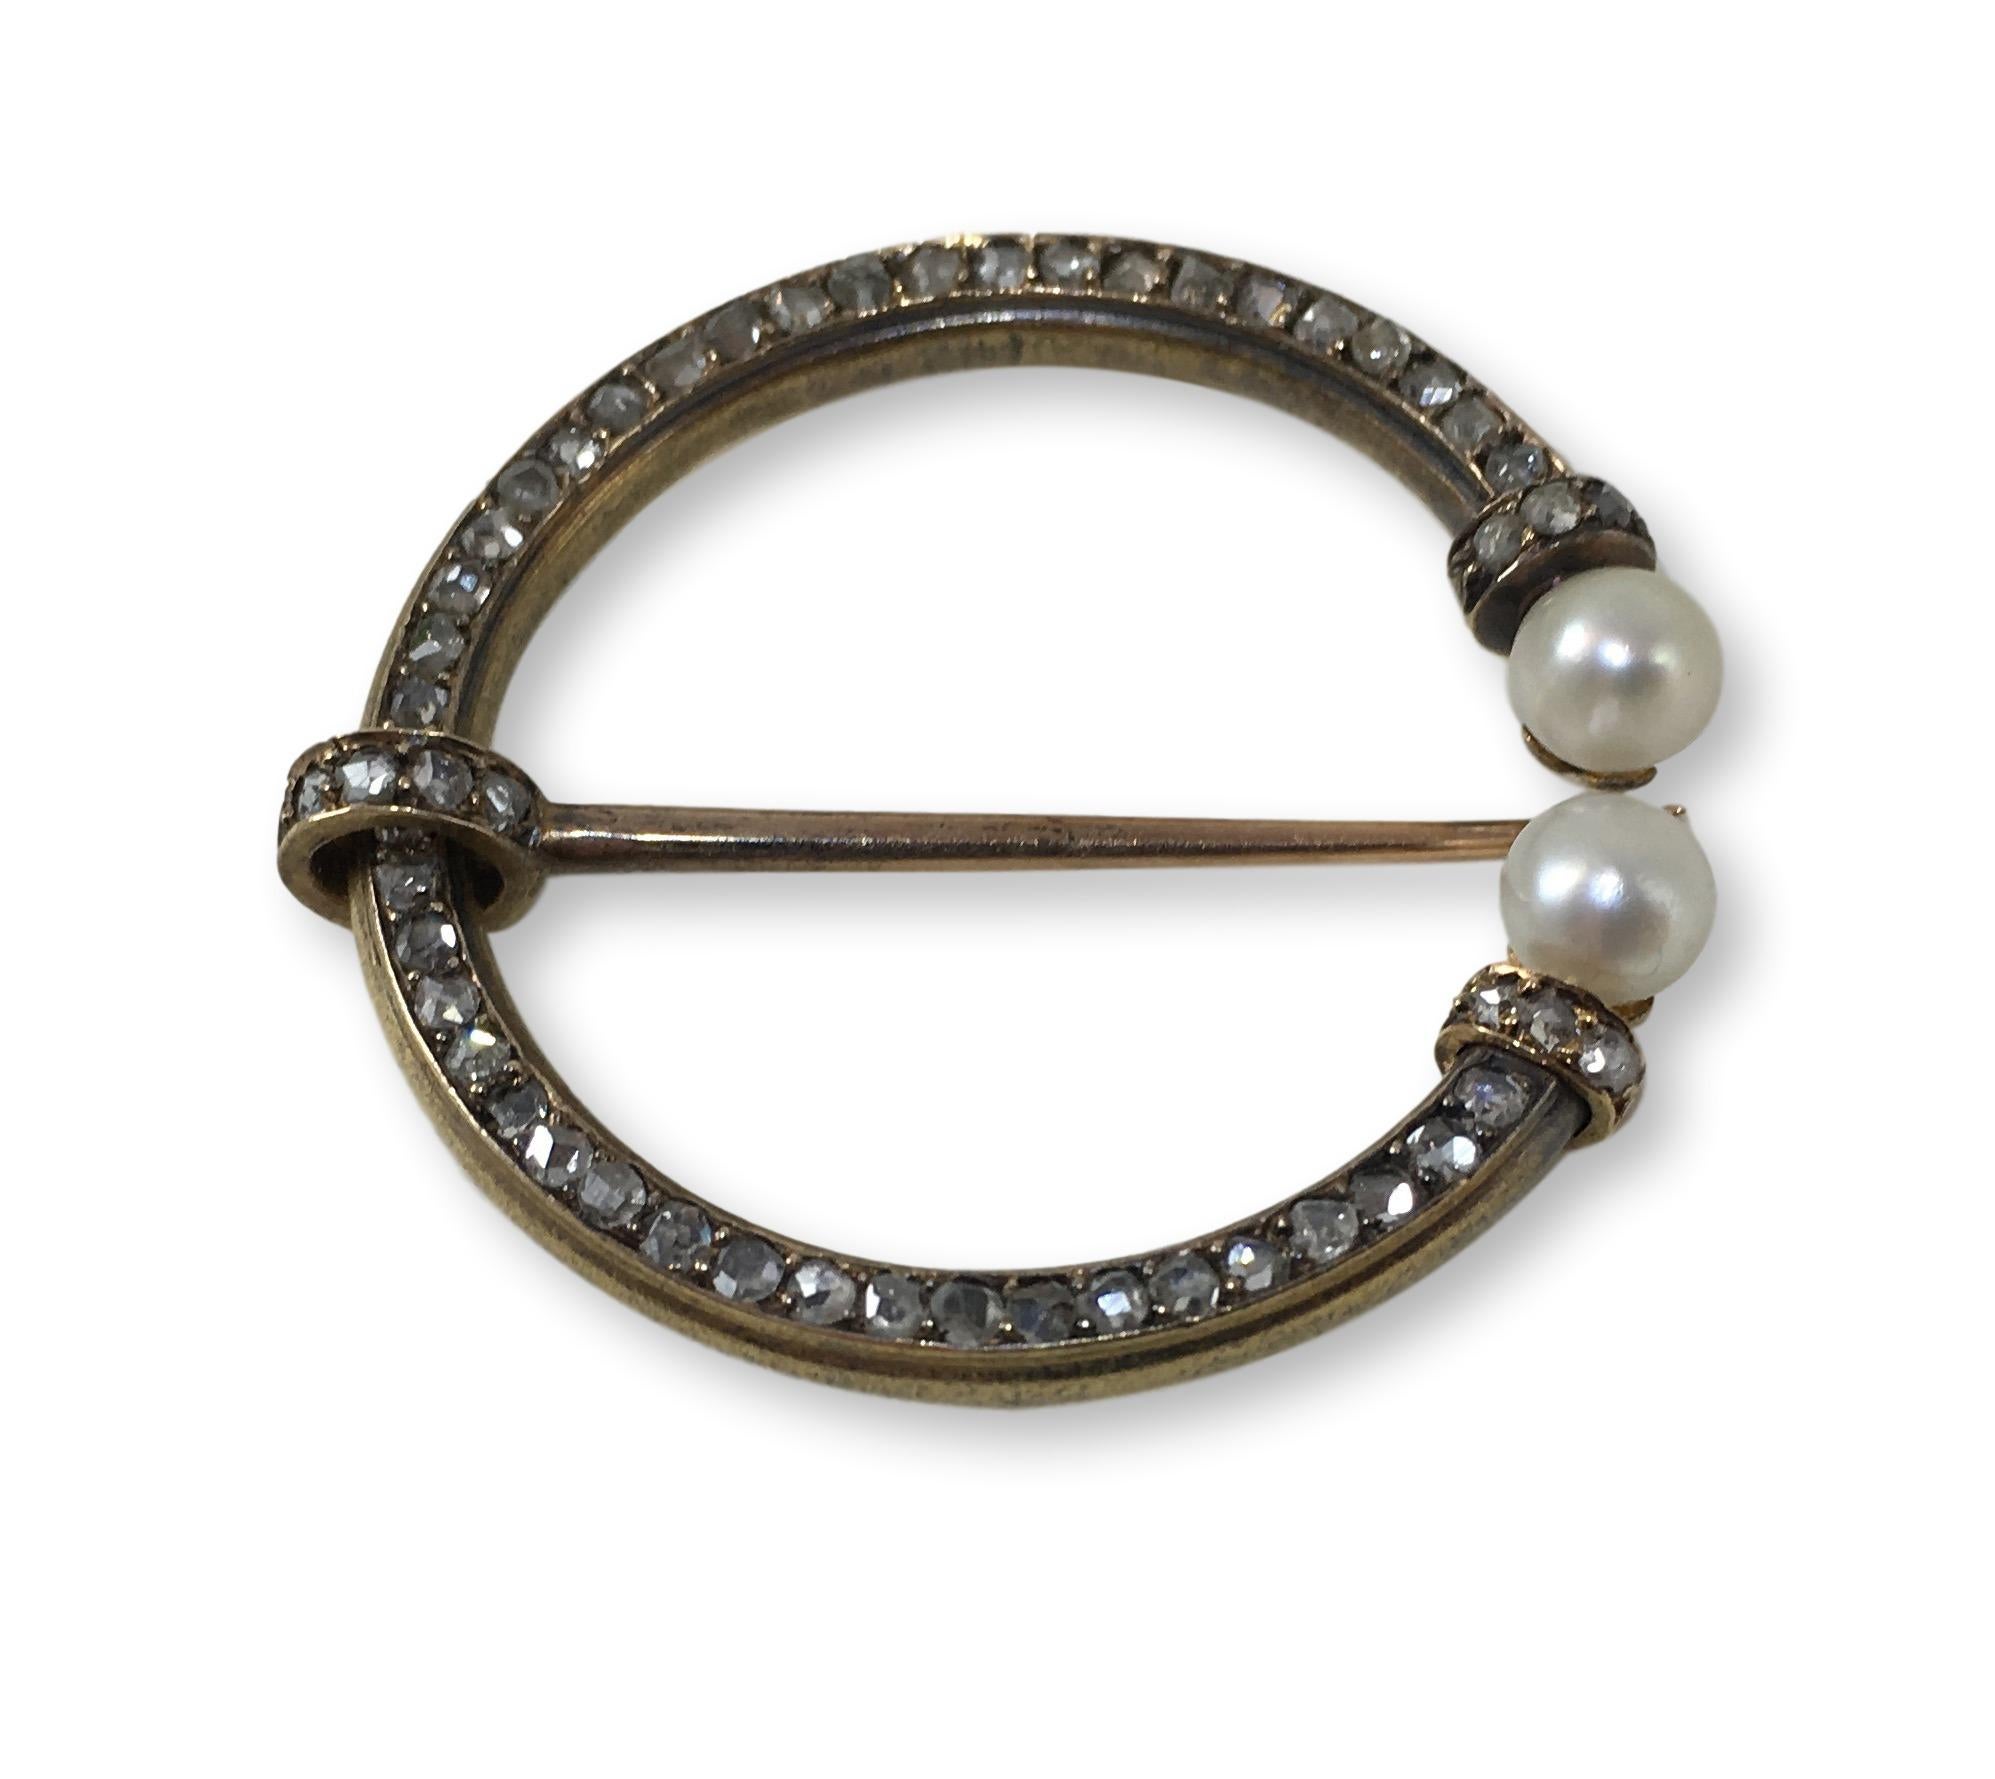 A beautifully made fibula brooch set to the hoop with rose-cut diamonds, terminating in a pair of button-shaped pearls. The gems are mounted in 18 carat gold.

The brooch contains 54 diamonds with a total estimated weight of 1.62 carats and 2